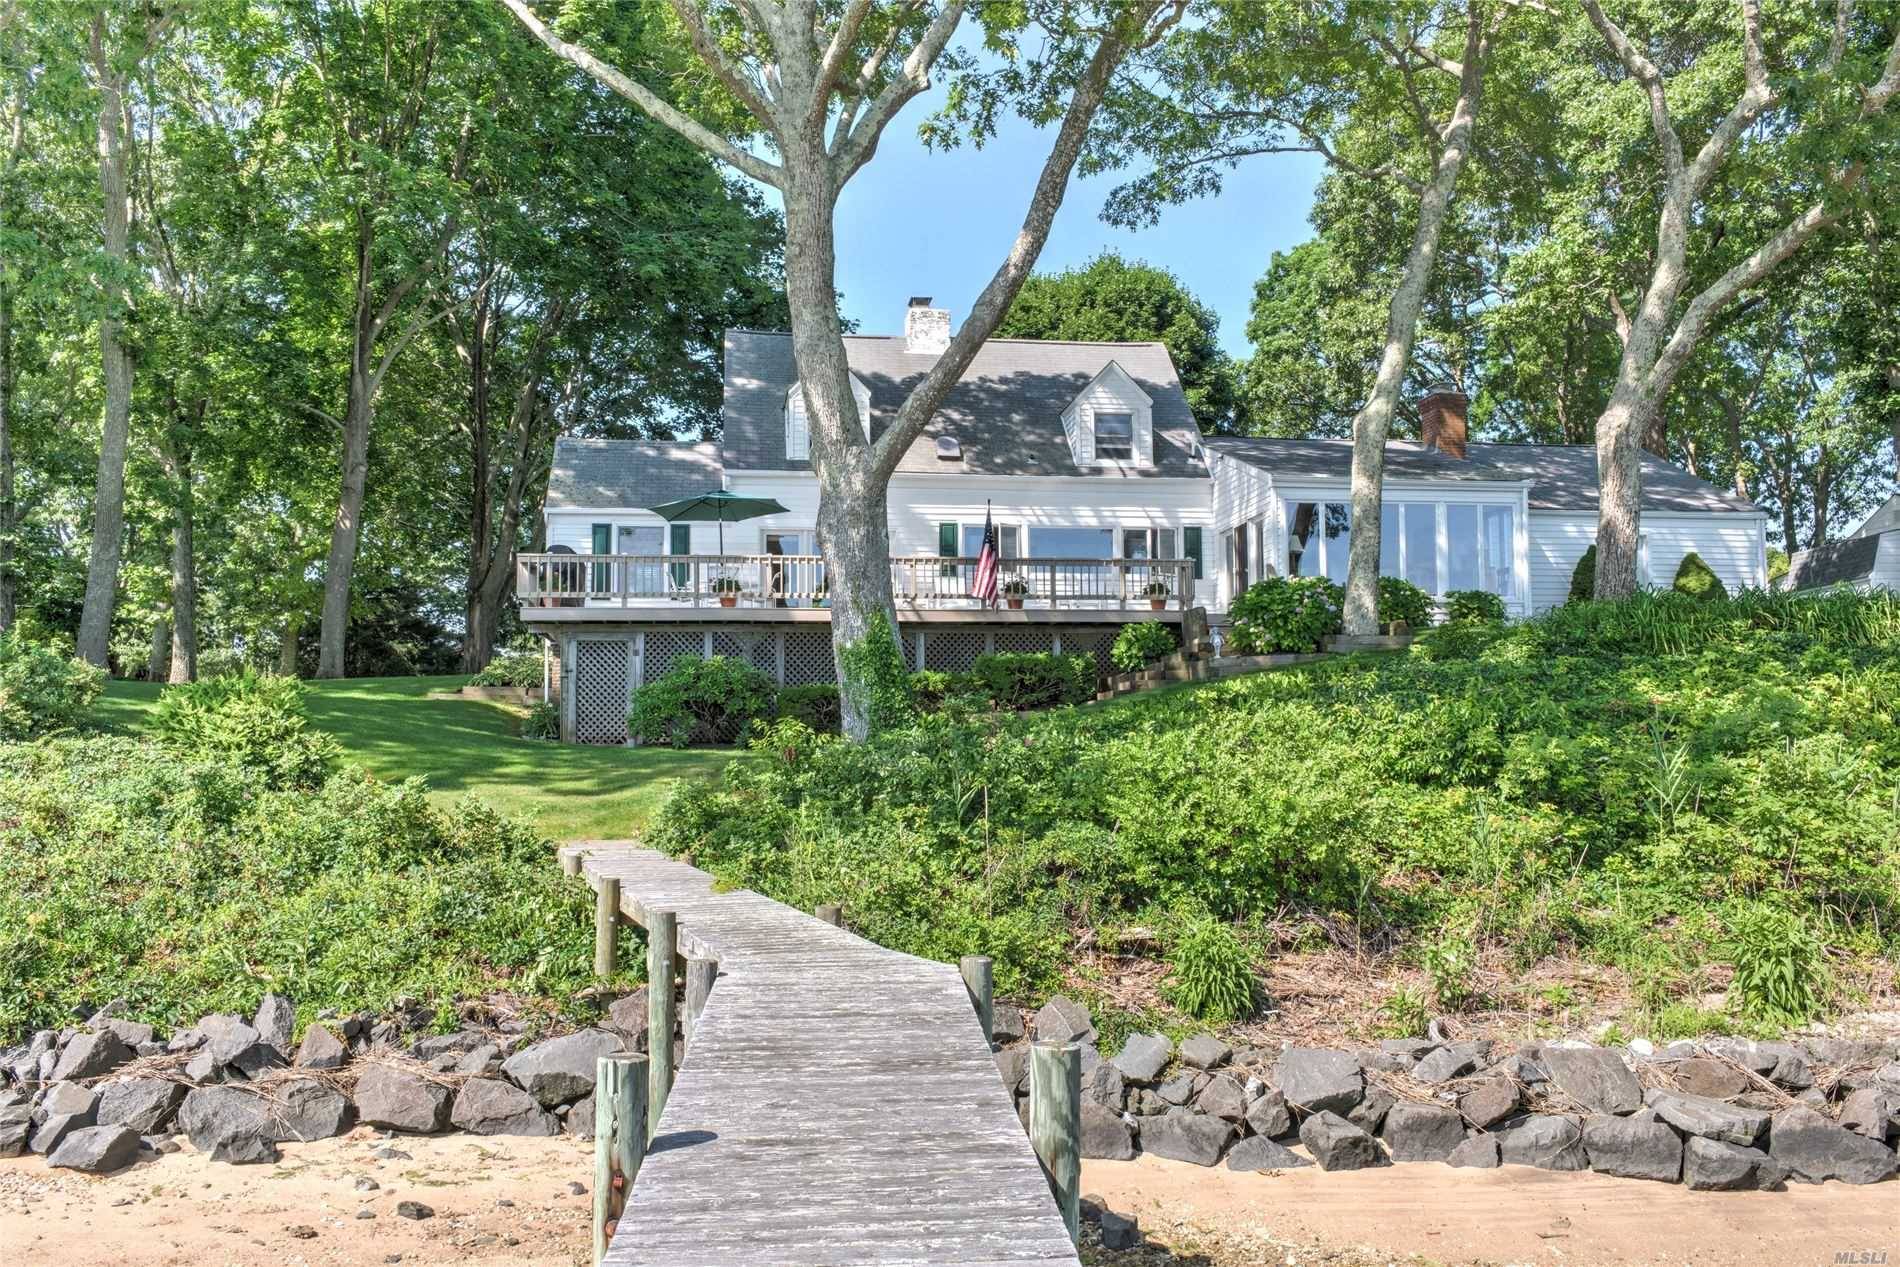 Cape Cod Waterfront located on one of Southold's most coveted streets, combines the best of elegance, style, amp ; craftsmanship.